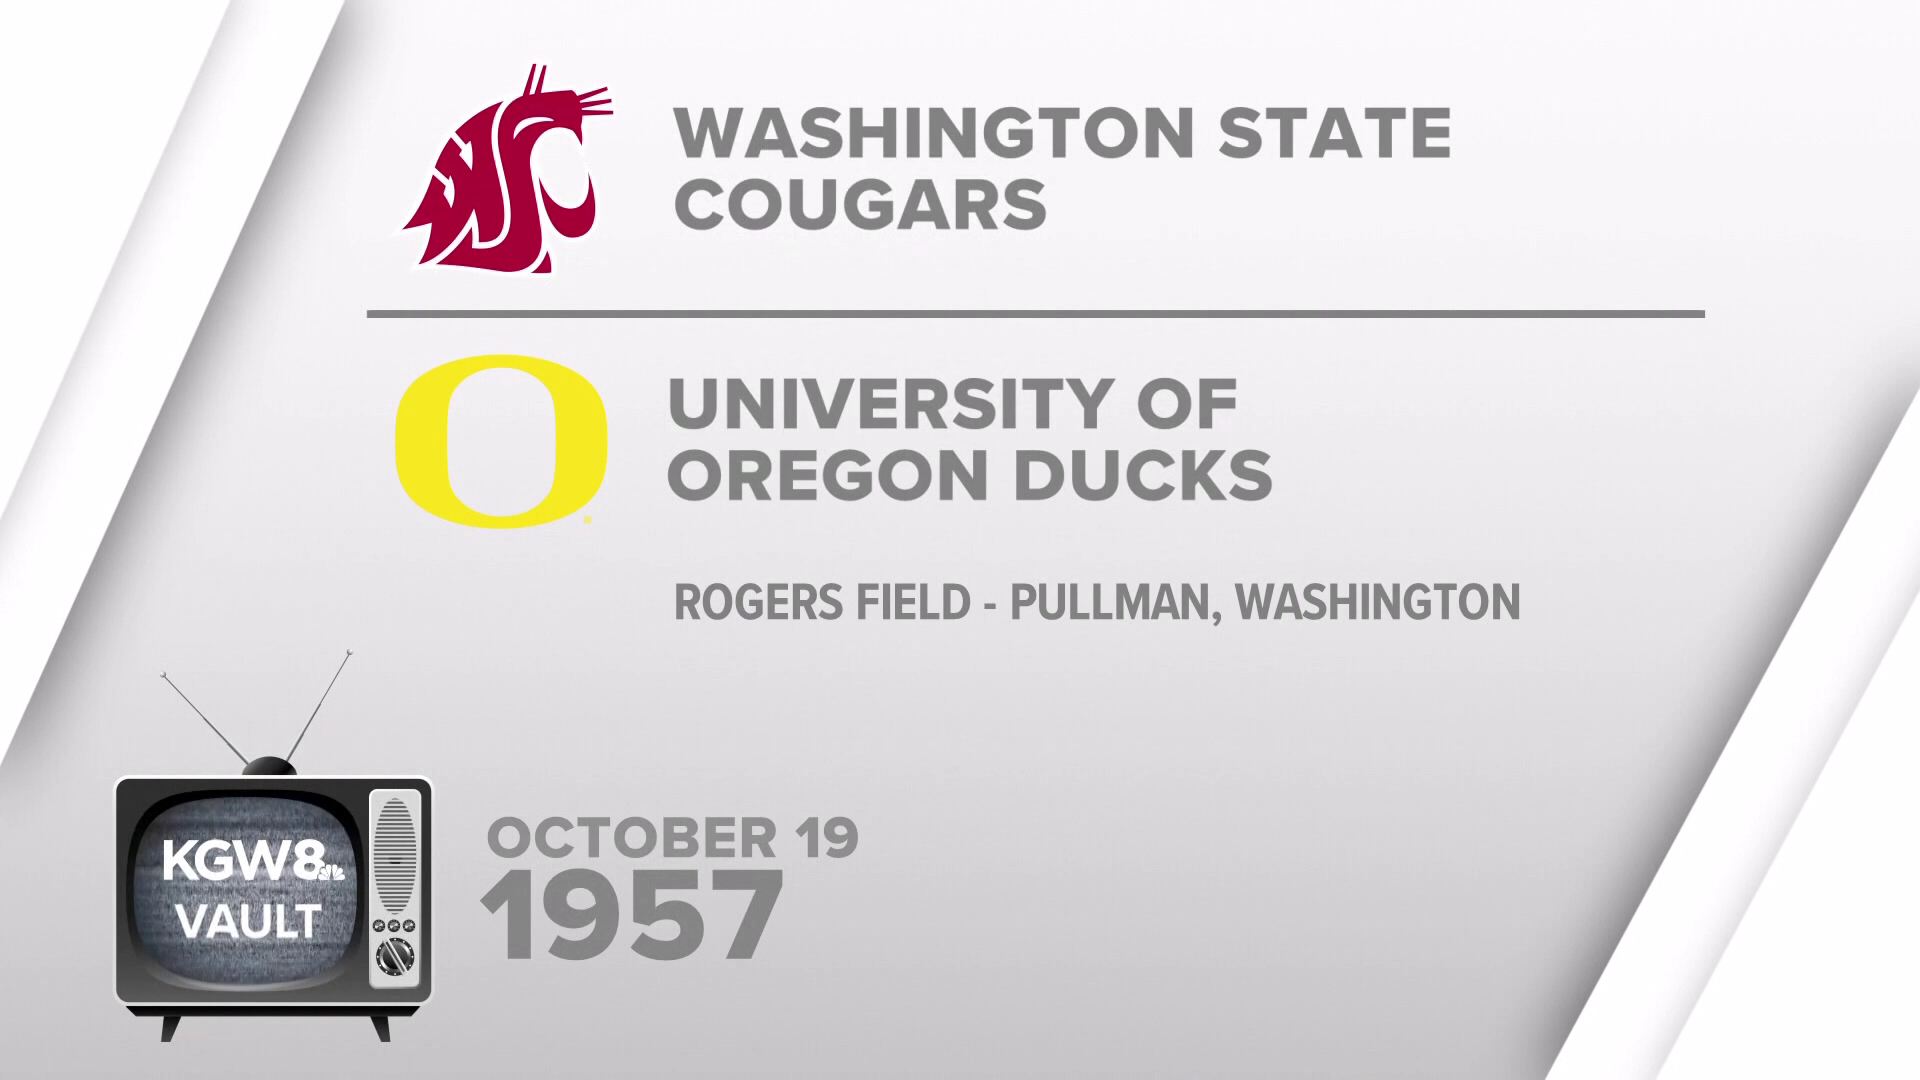 The complete football match-up between the University of Oregon Ducks and the Washington State Cougars filmed live at Rogers Field, Pullman, October 19th, 1957